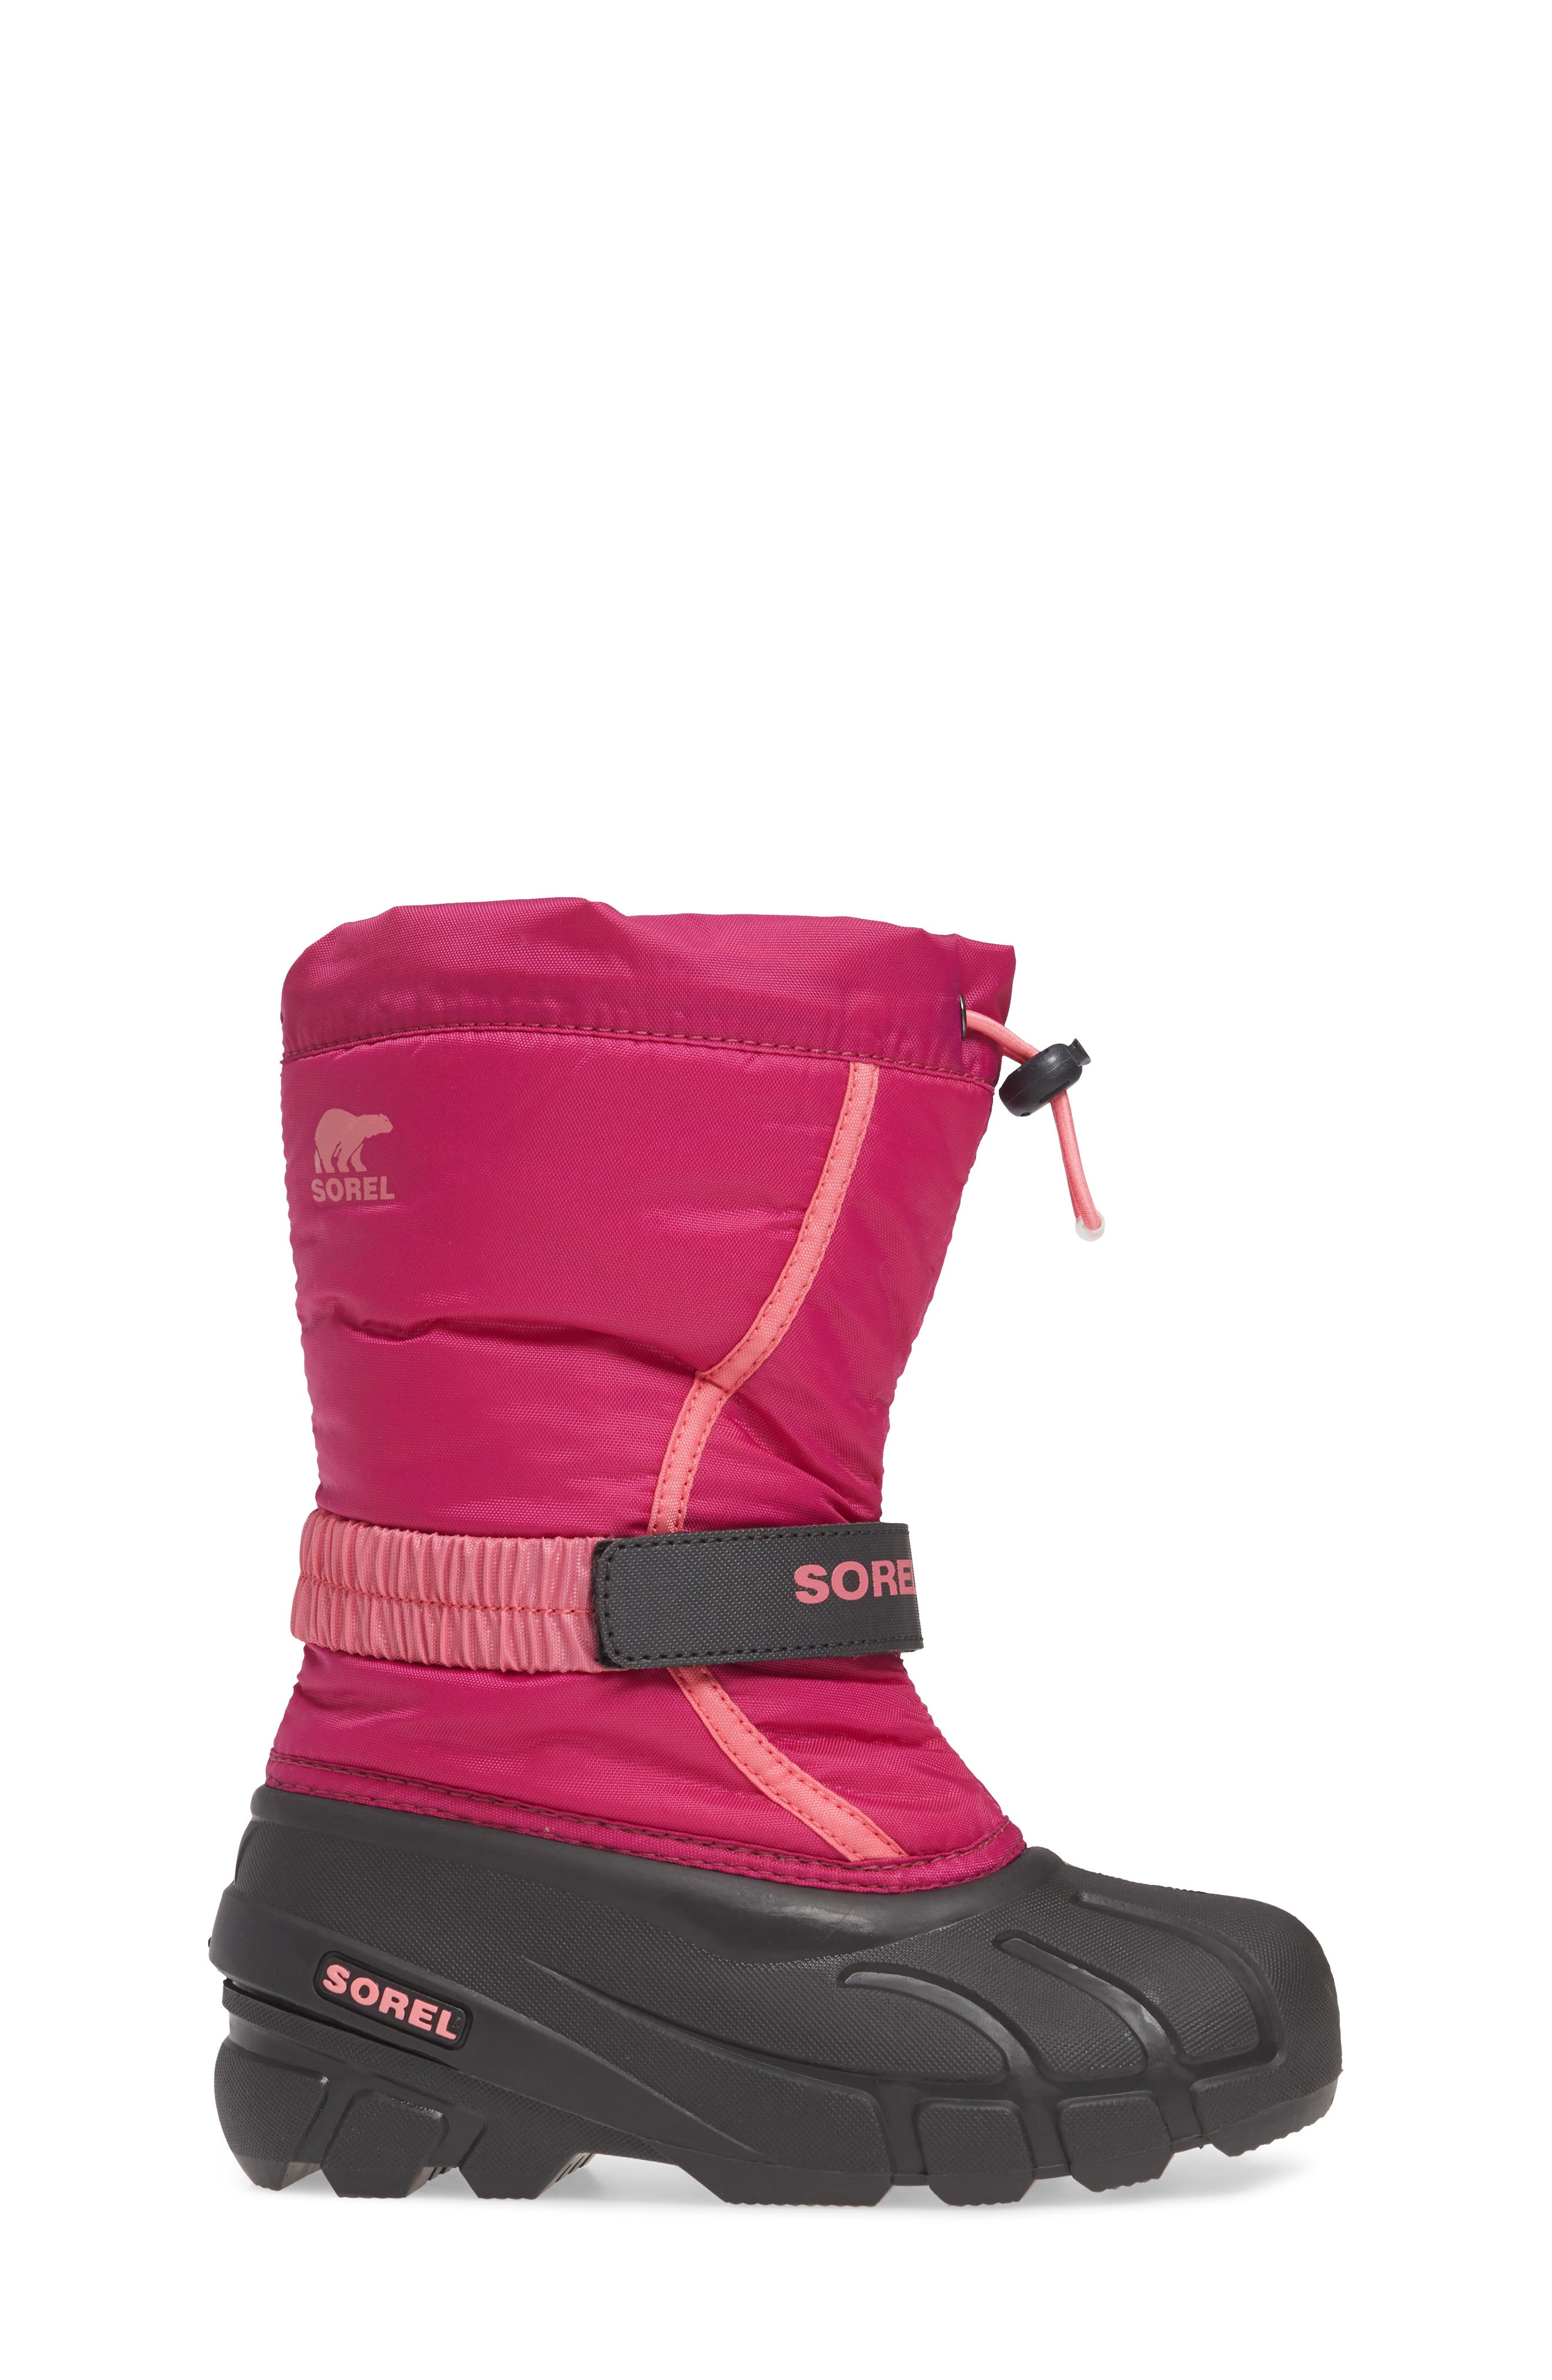 NEW IN THE BOX SOREL FLURRY WINTER BOOTS DEEP BLUSH TROPIC PINK FOR CHILDREN 